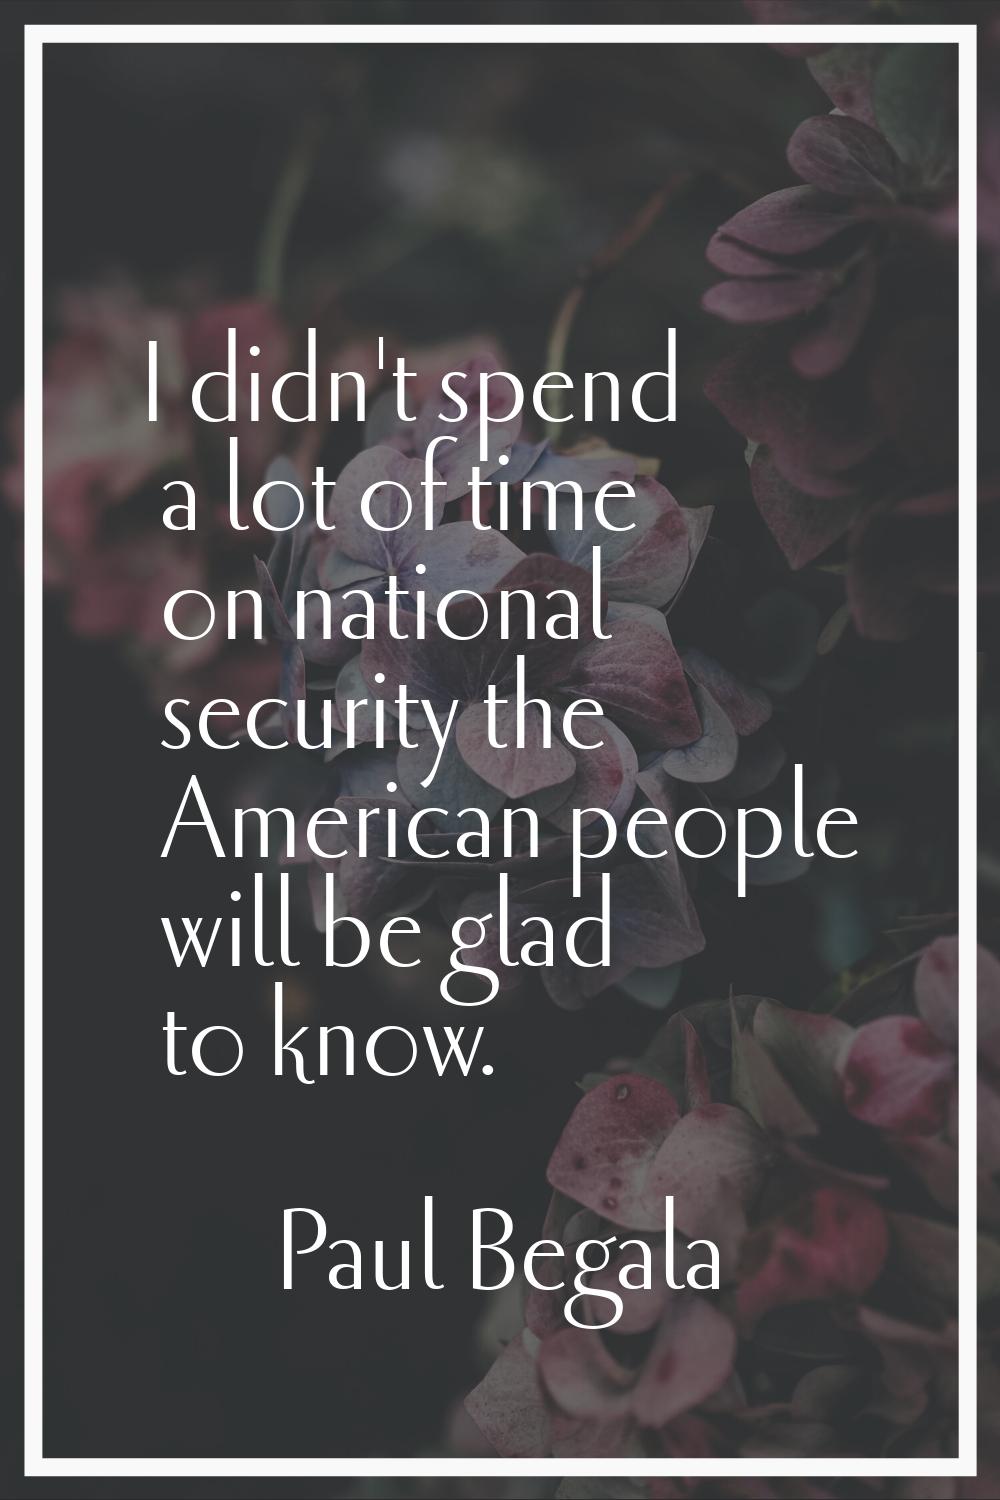 I didn't spend a lot of time on national security the American people will be glad to know.